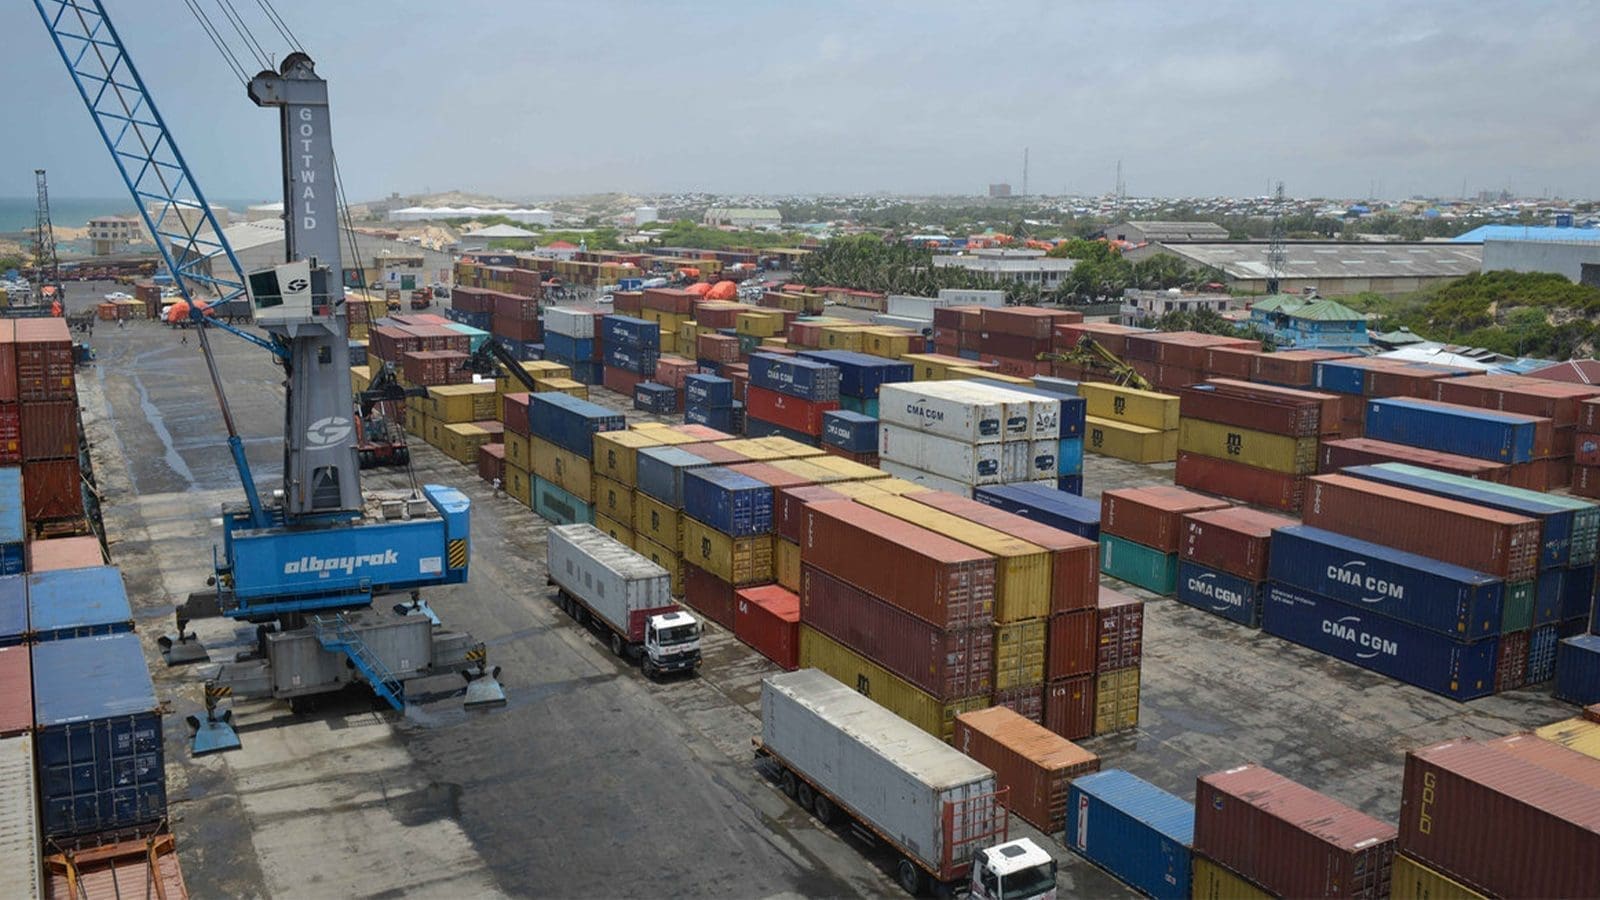 Somalia implements stricter import regulations to align with global quality standards